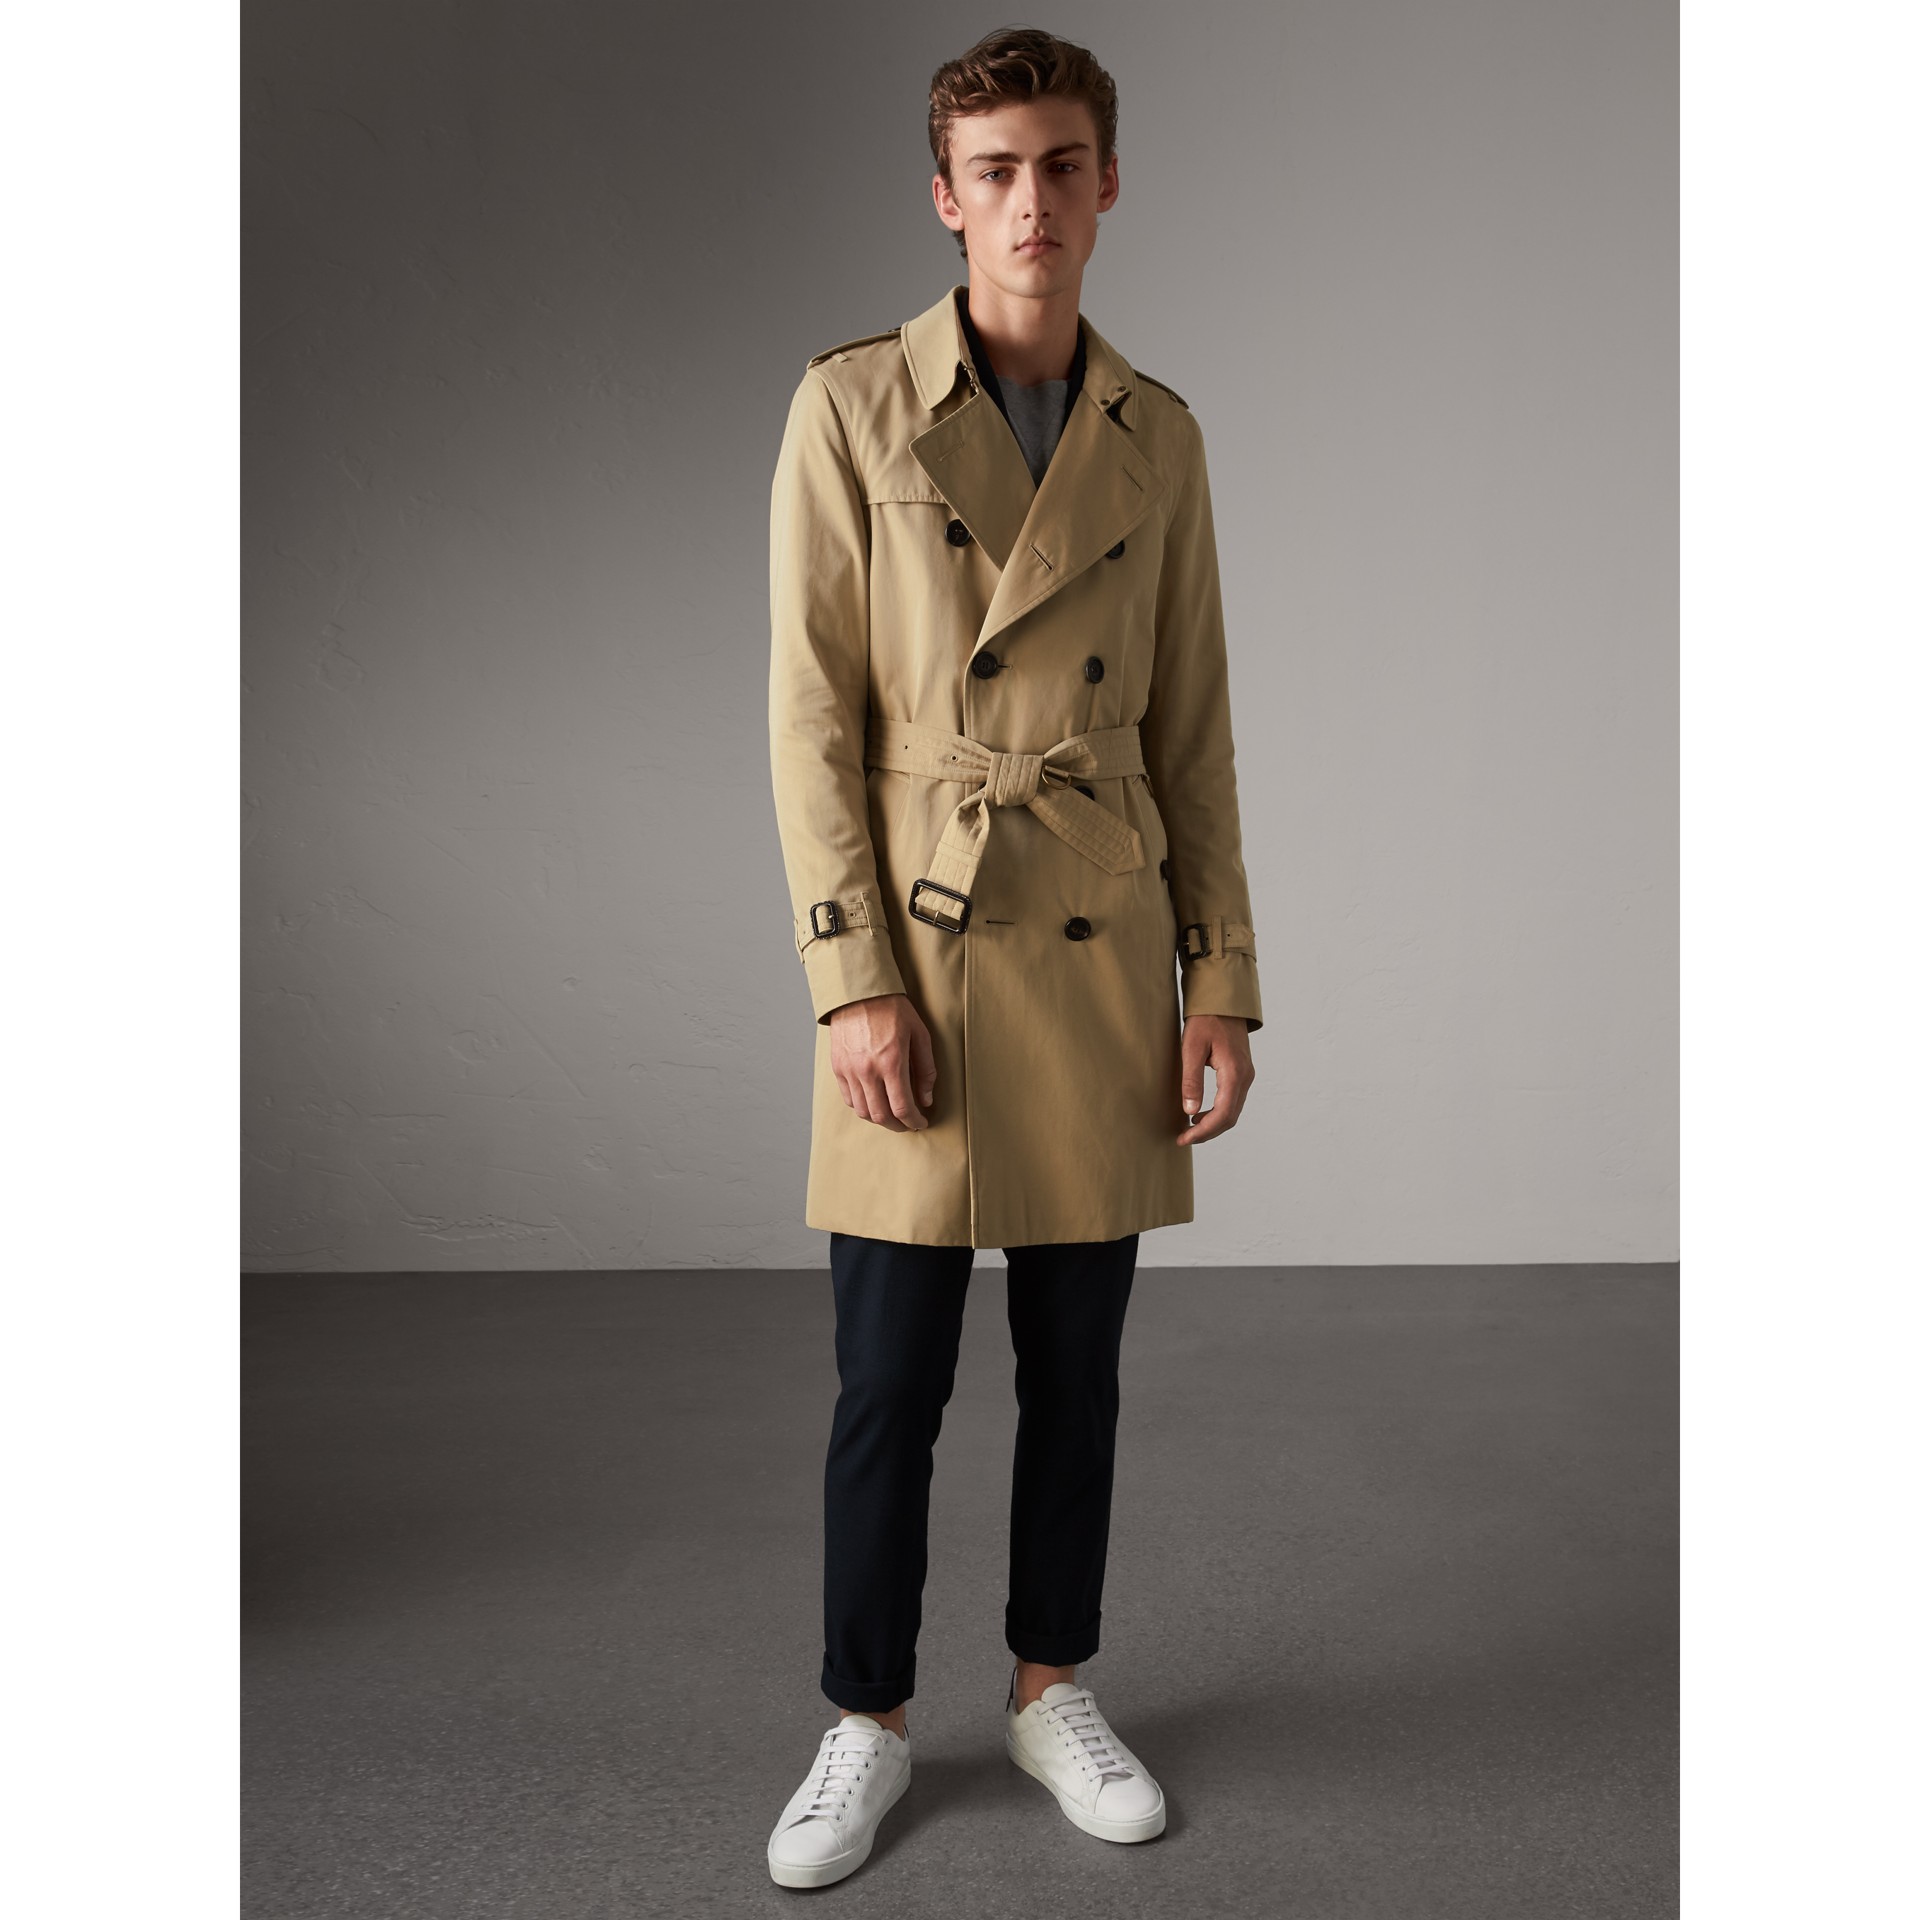 Burberry mens trench coats? : r/DHgate